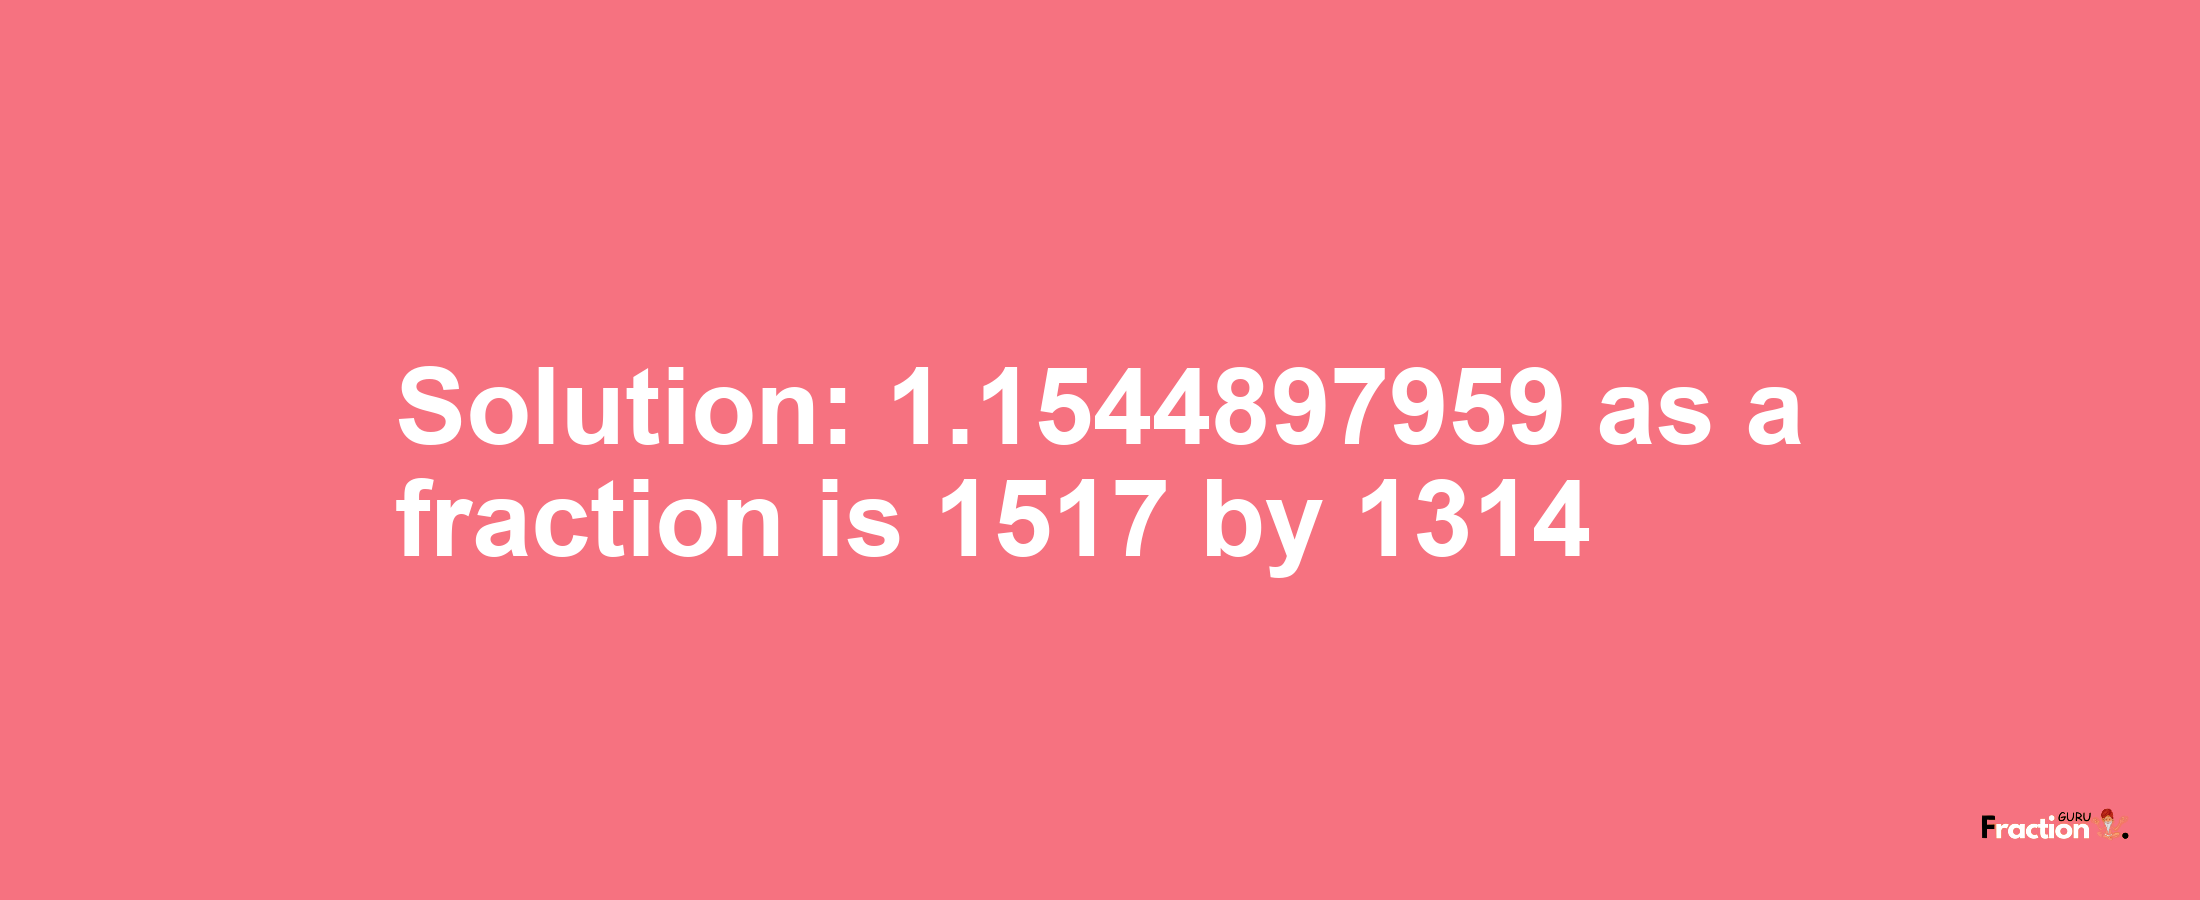 Solution:1.1544897959 as a fraction is 1517/1314